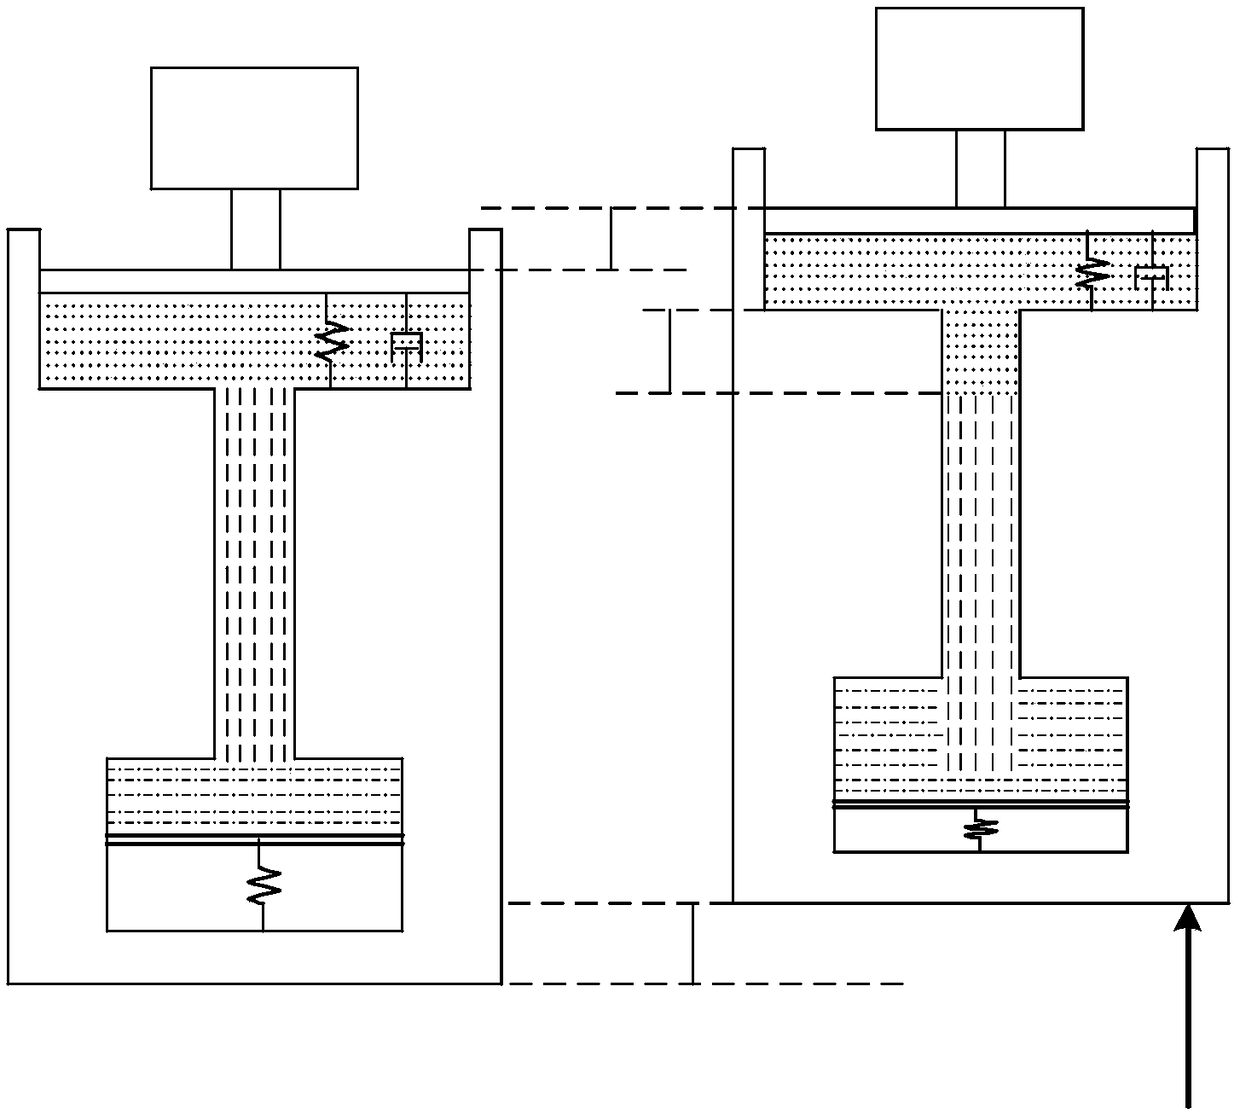 Hydraulic-elastic vibration isolator connected to main supporting reducing rod in series